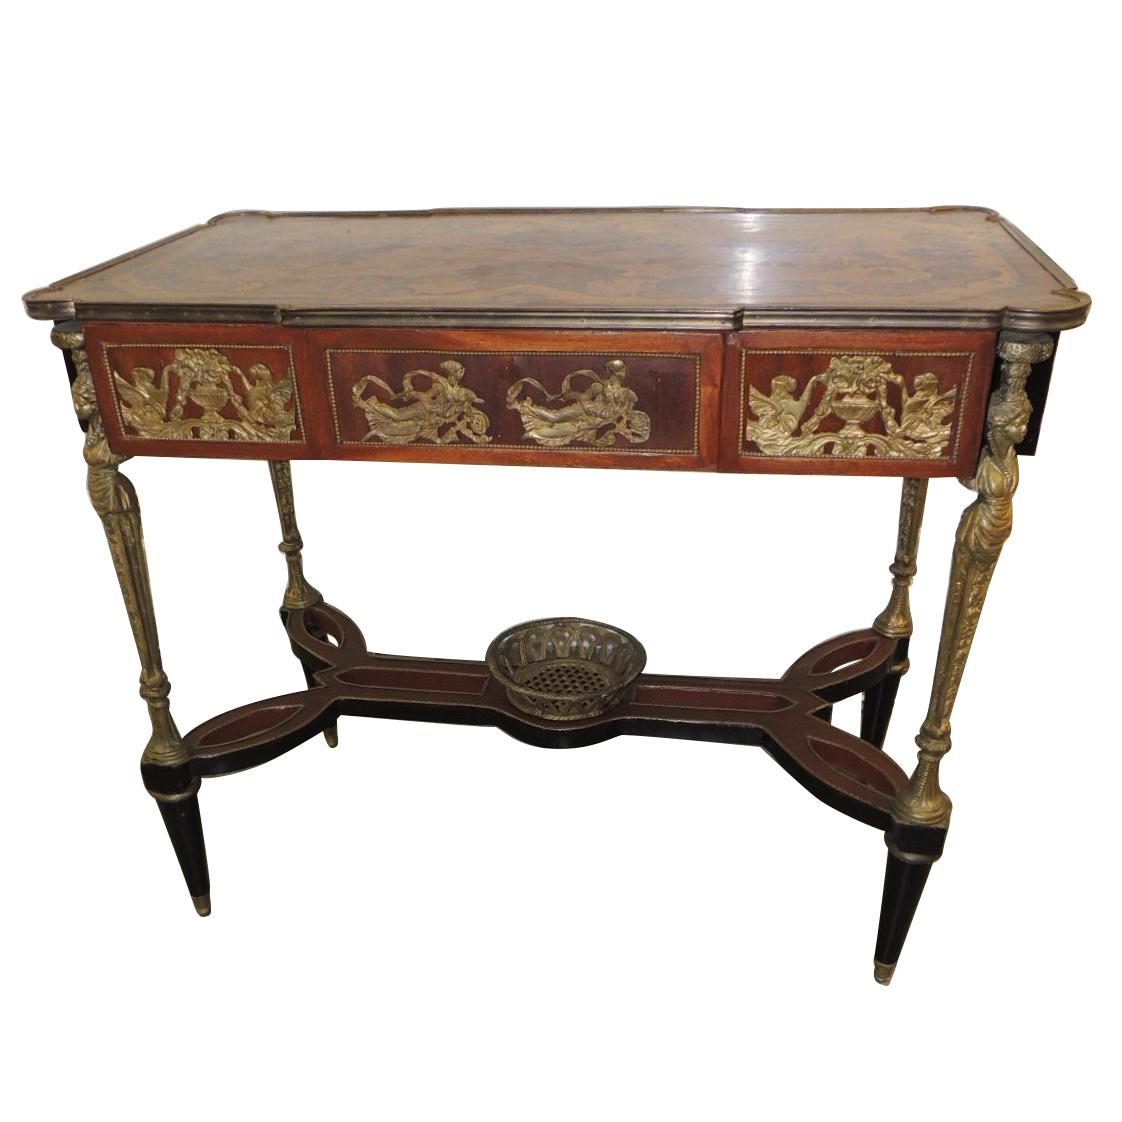 Reproduction of Louis XVI Style Center Table